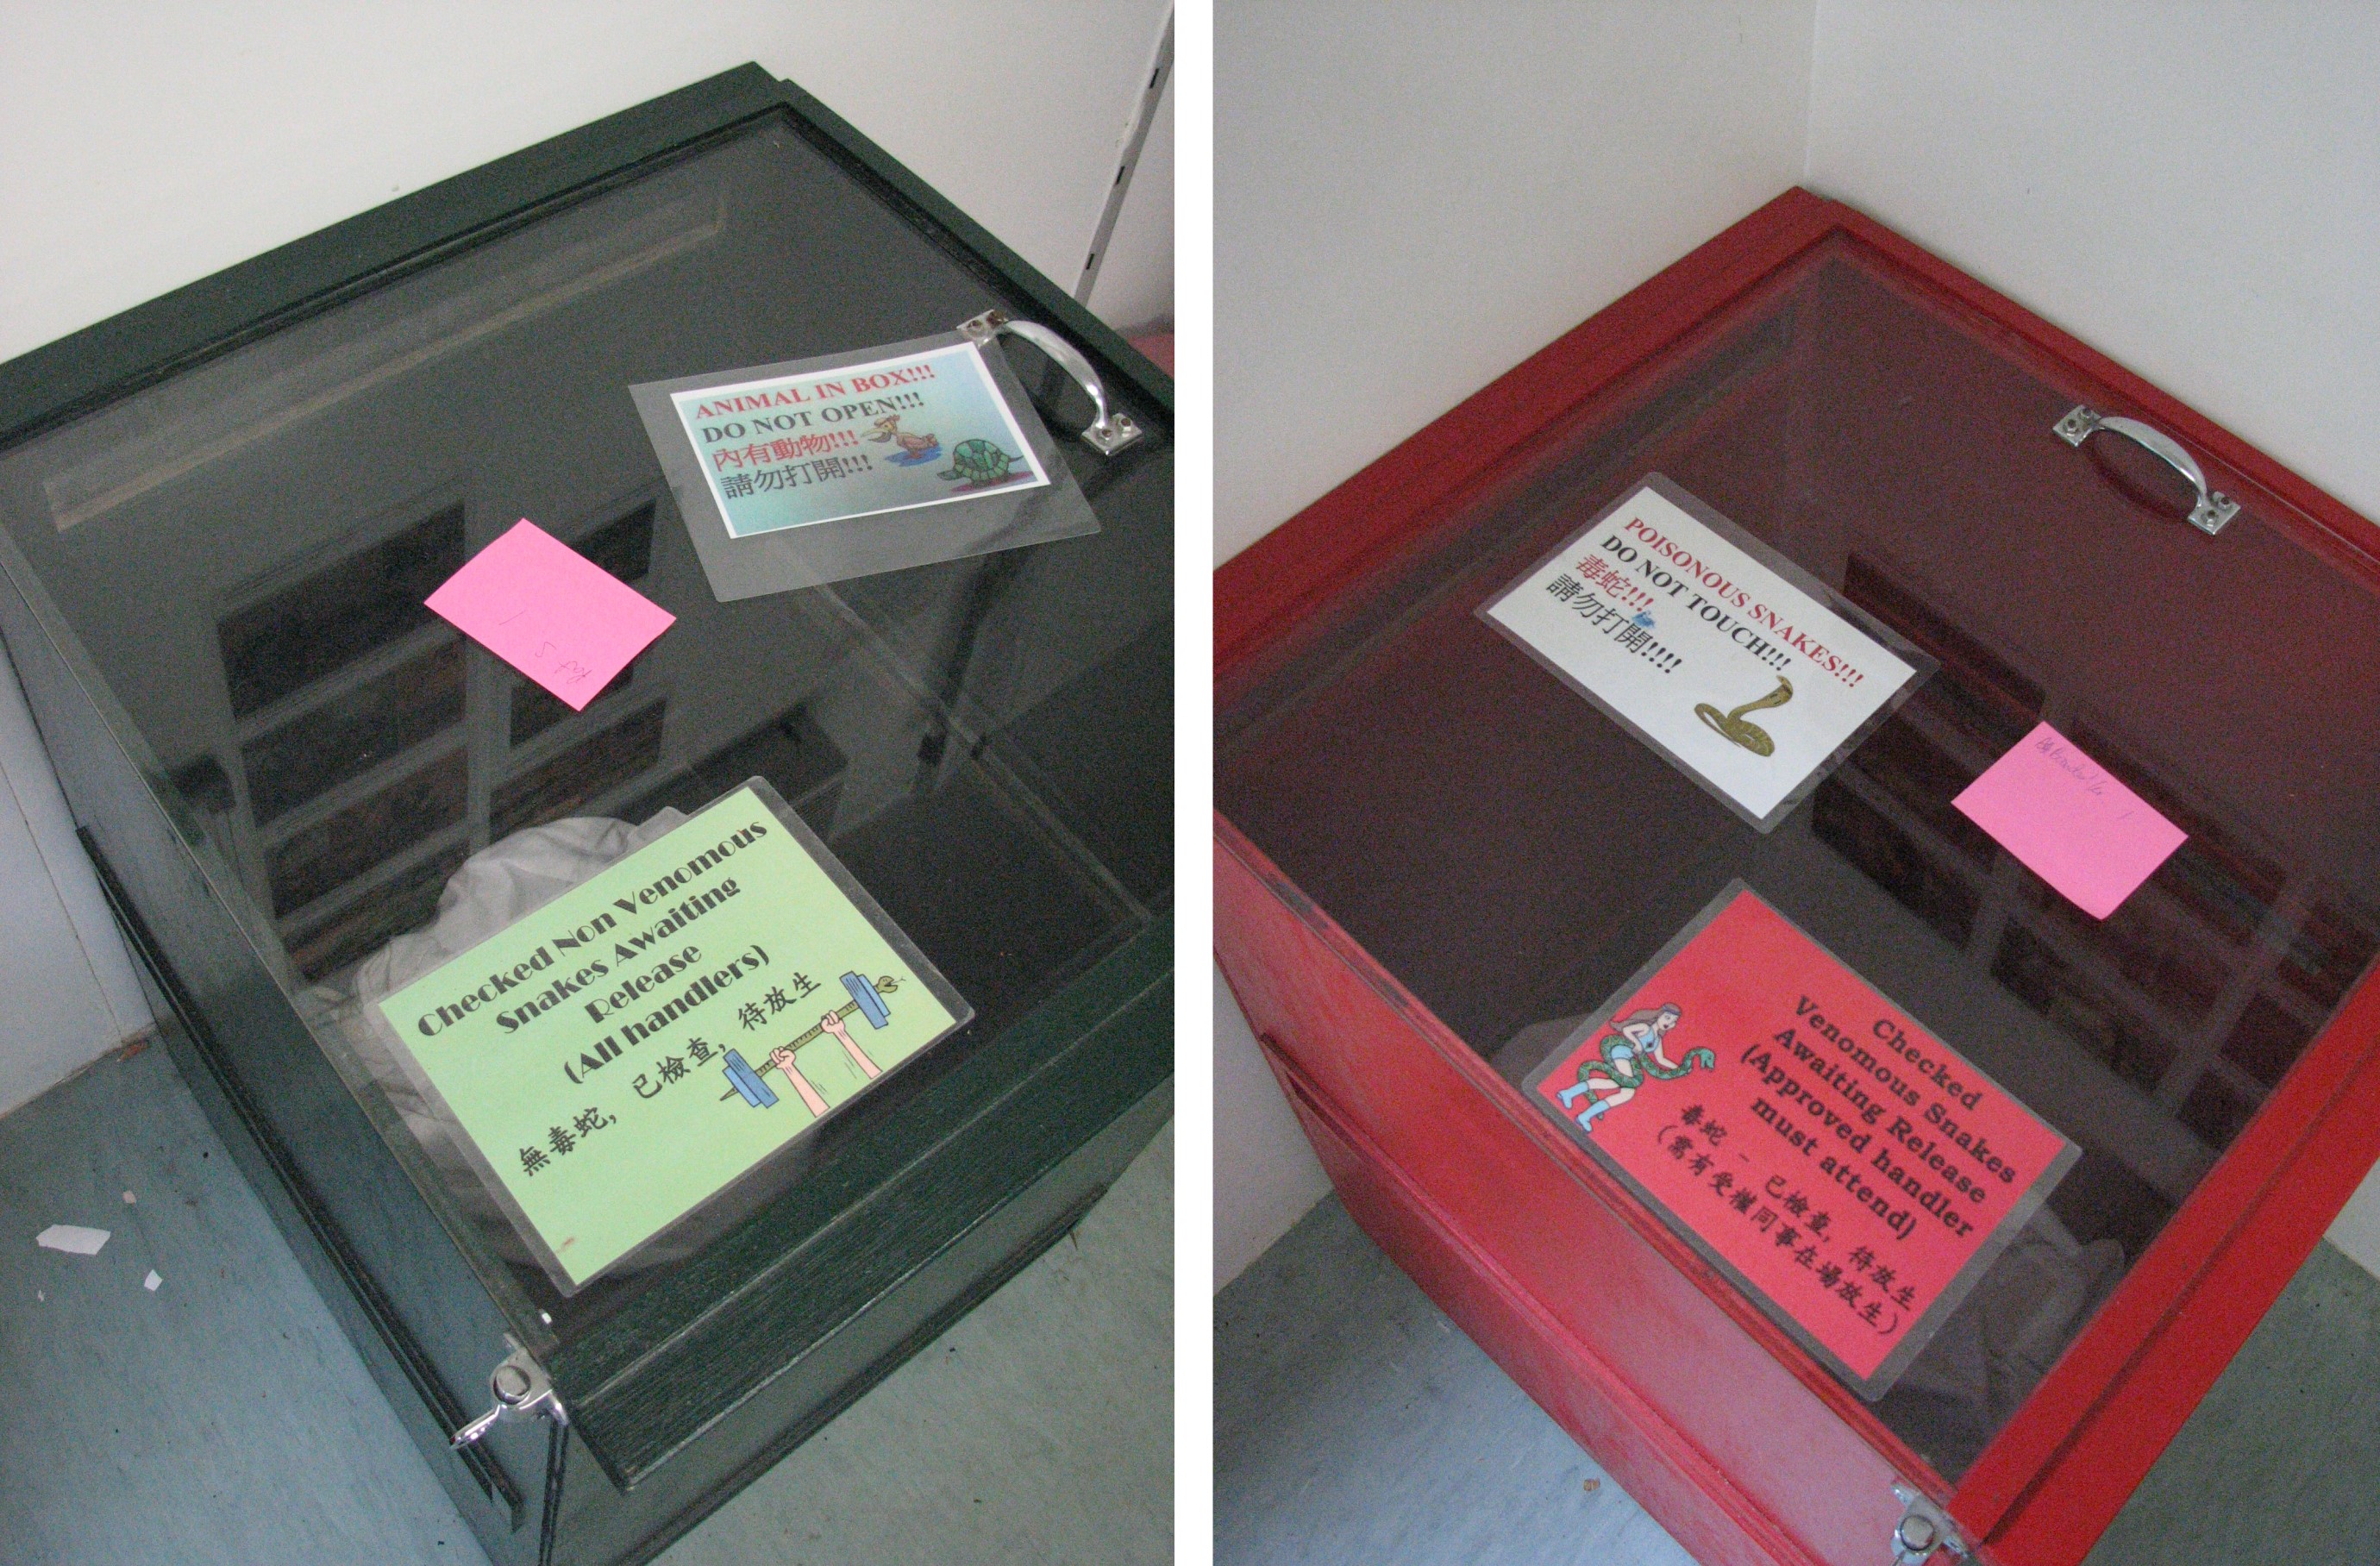 Before release, snakes are temporarily held in bags inside either a venomous snake holding box (Red) or a non-venomous box (Green) depending on the species. Both boxes have lockable lids and small airholes.